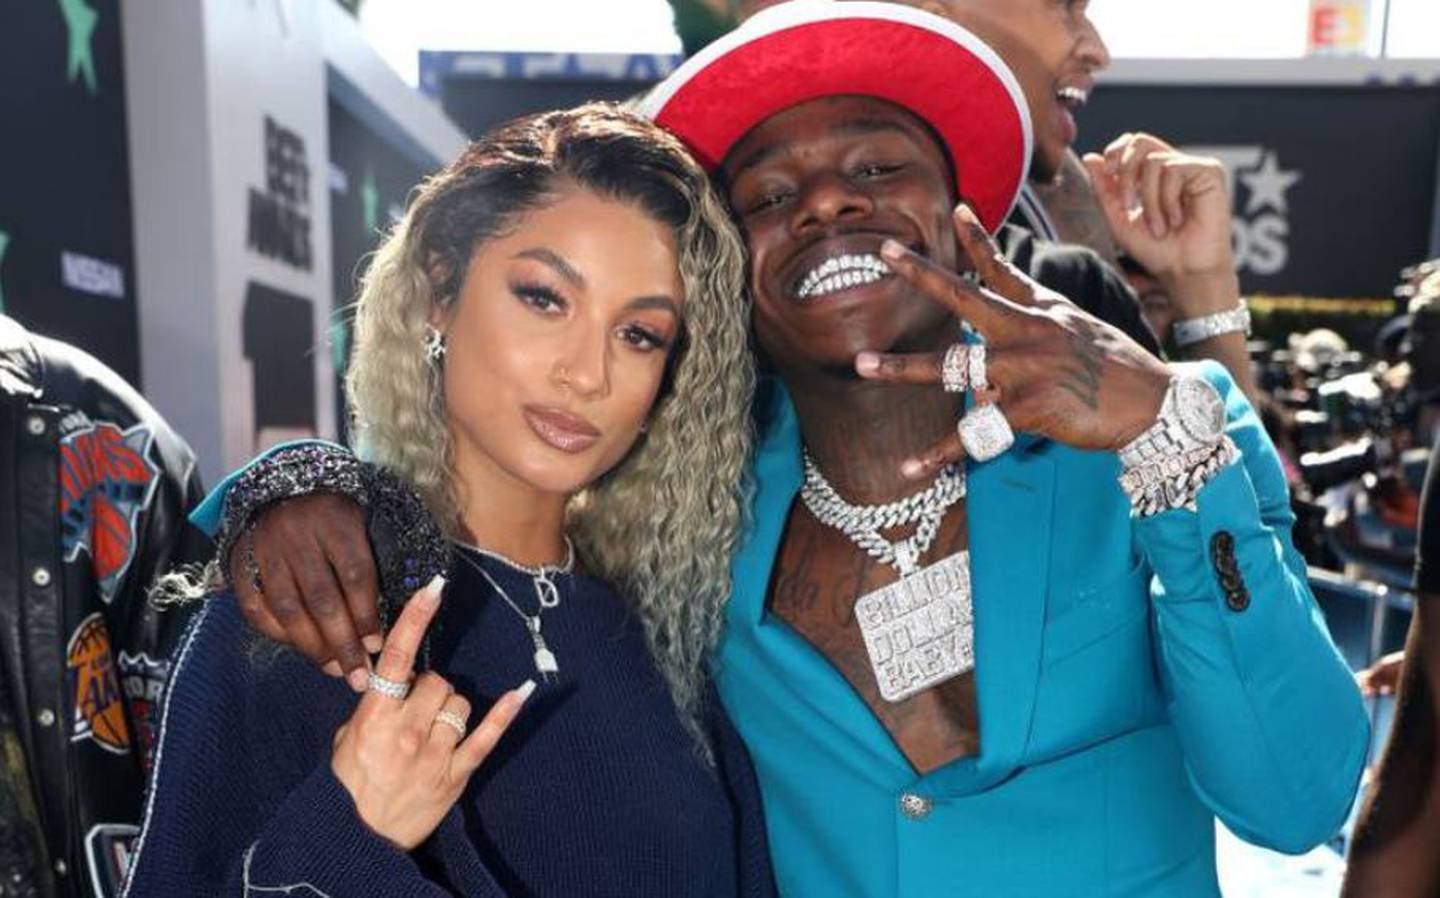 DaniLeigh, left, and DaBaby, right, attend the 2019 BET Awards at Microsoft Theater on June 23, 2019 in Los Angeles, California. DaniLeigh was charged Monday, Nov. 15, 2021, with two counts of simple assault against DaBaby. (Photo by Johnny Nunez/Getty Images)